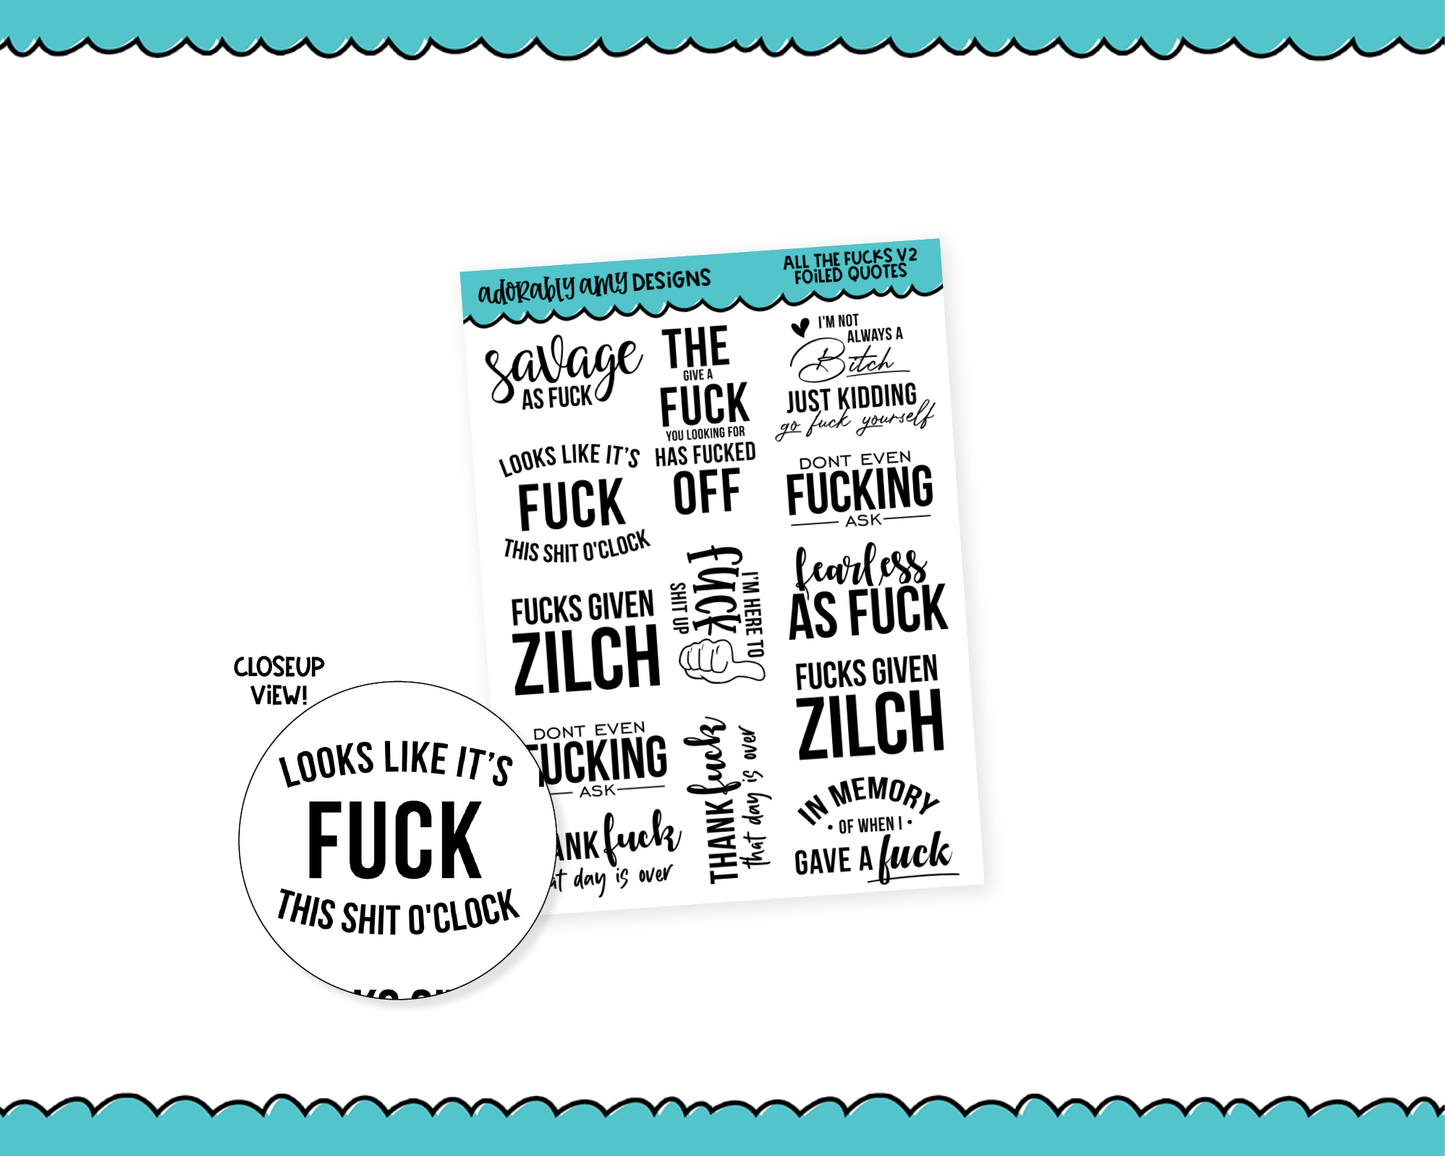 All the F*cks V2 Sweary Snarky Quote Sampler Planner Stickers for any Planner or Insert